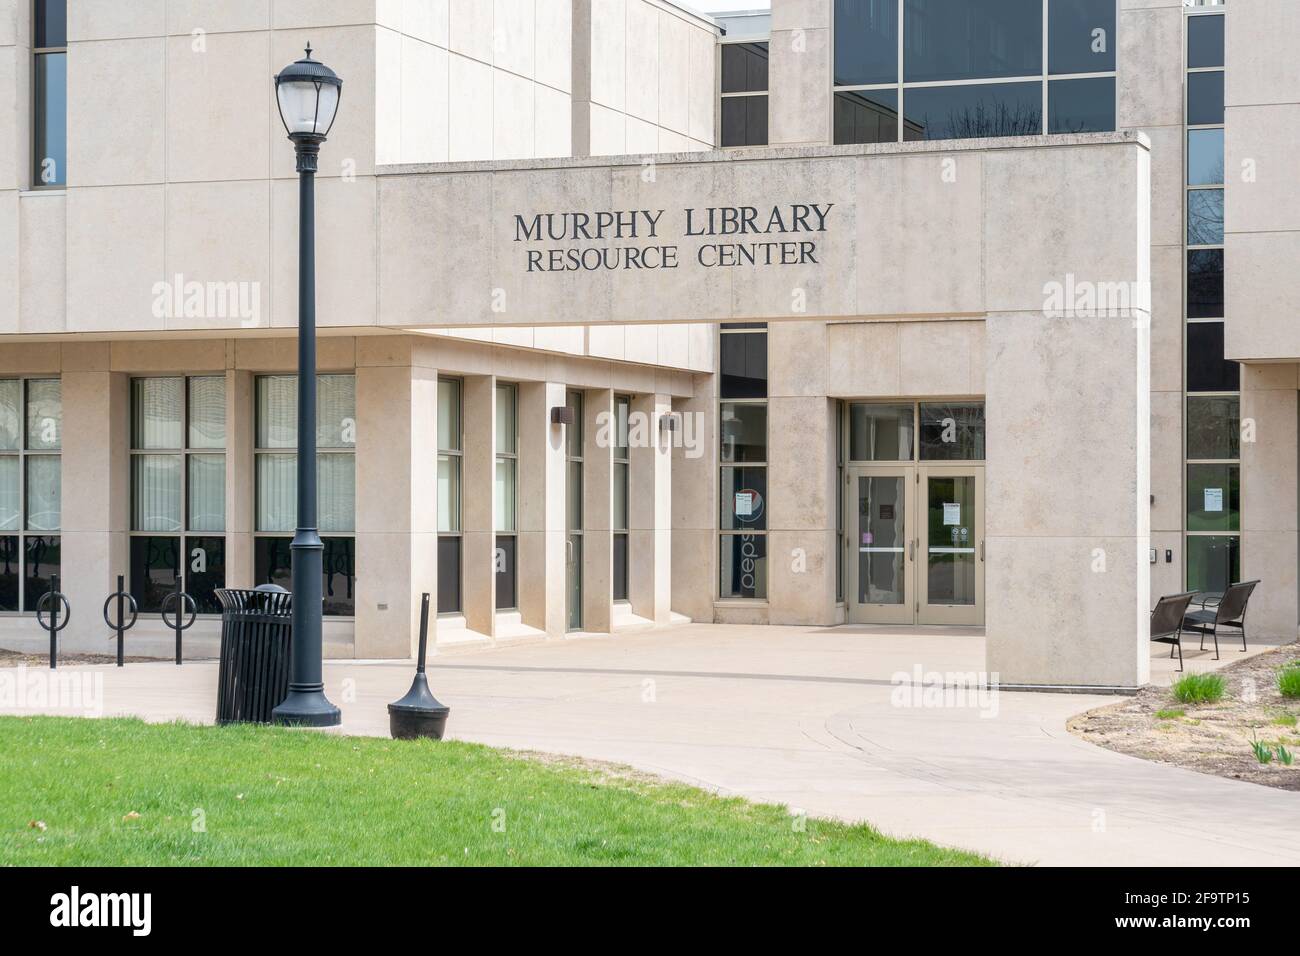 LA CROSSE, WI,USA - APRIL 17, 2021 - Murphy Library Resource Center on the campus of the University of Wisconsin-La Crosse. Stock Photo